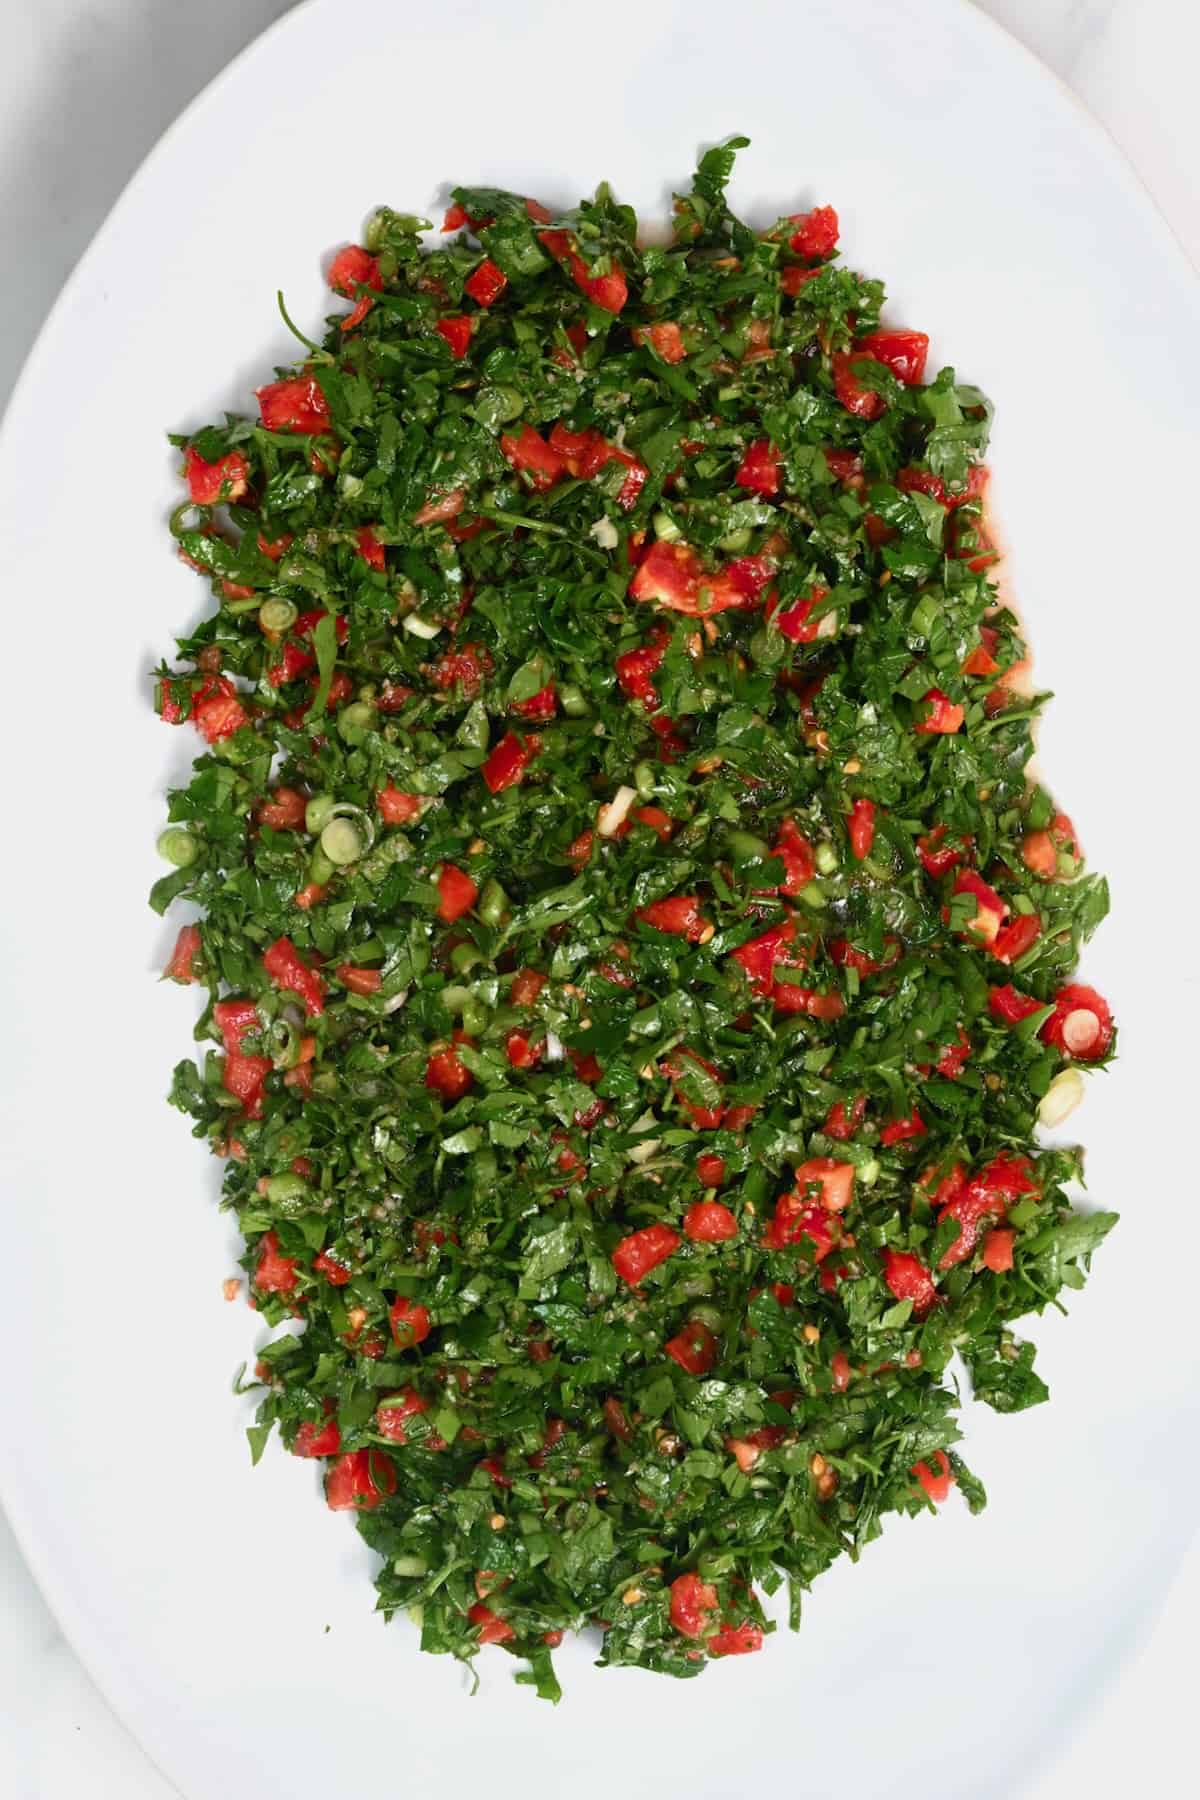 Tabbouleh salad in a large plate